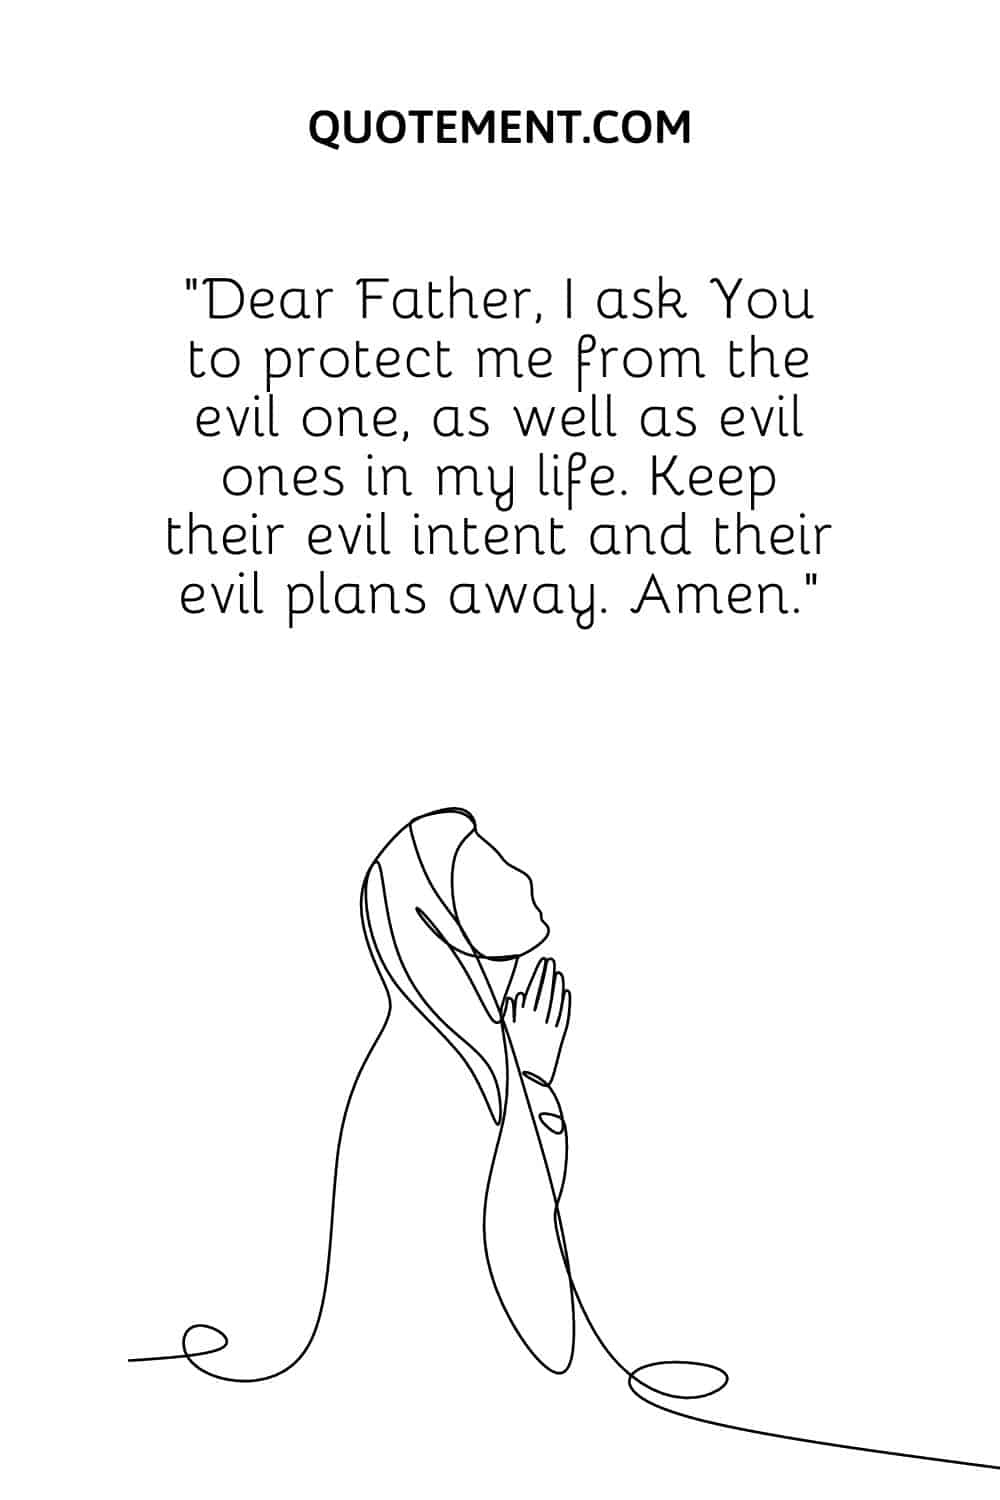 Dear Father, I ask You to protect me from the evil one, as well as evil ones in my life